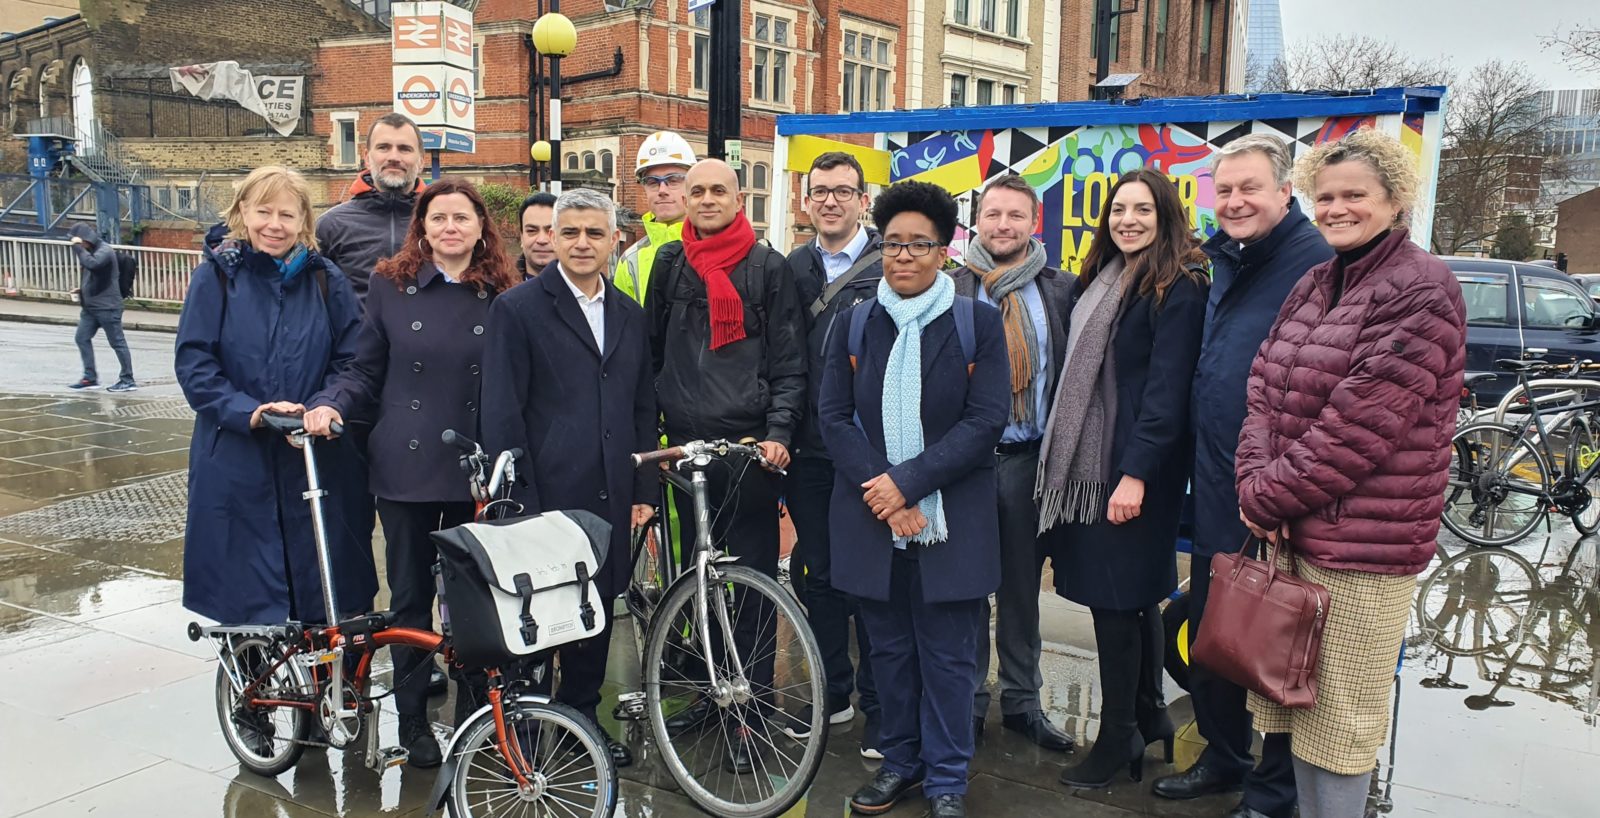 A group shot of Lambeth Cllr, The London Mayor Sadiq Khan and local cycling campaigners